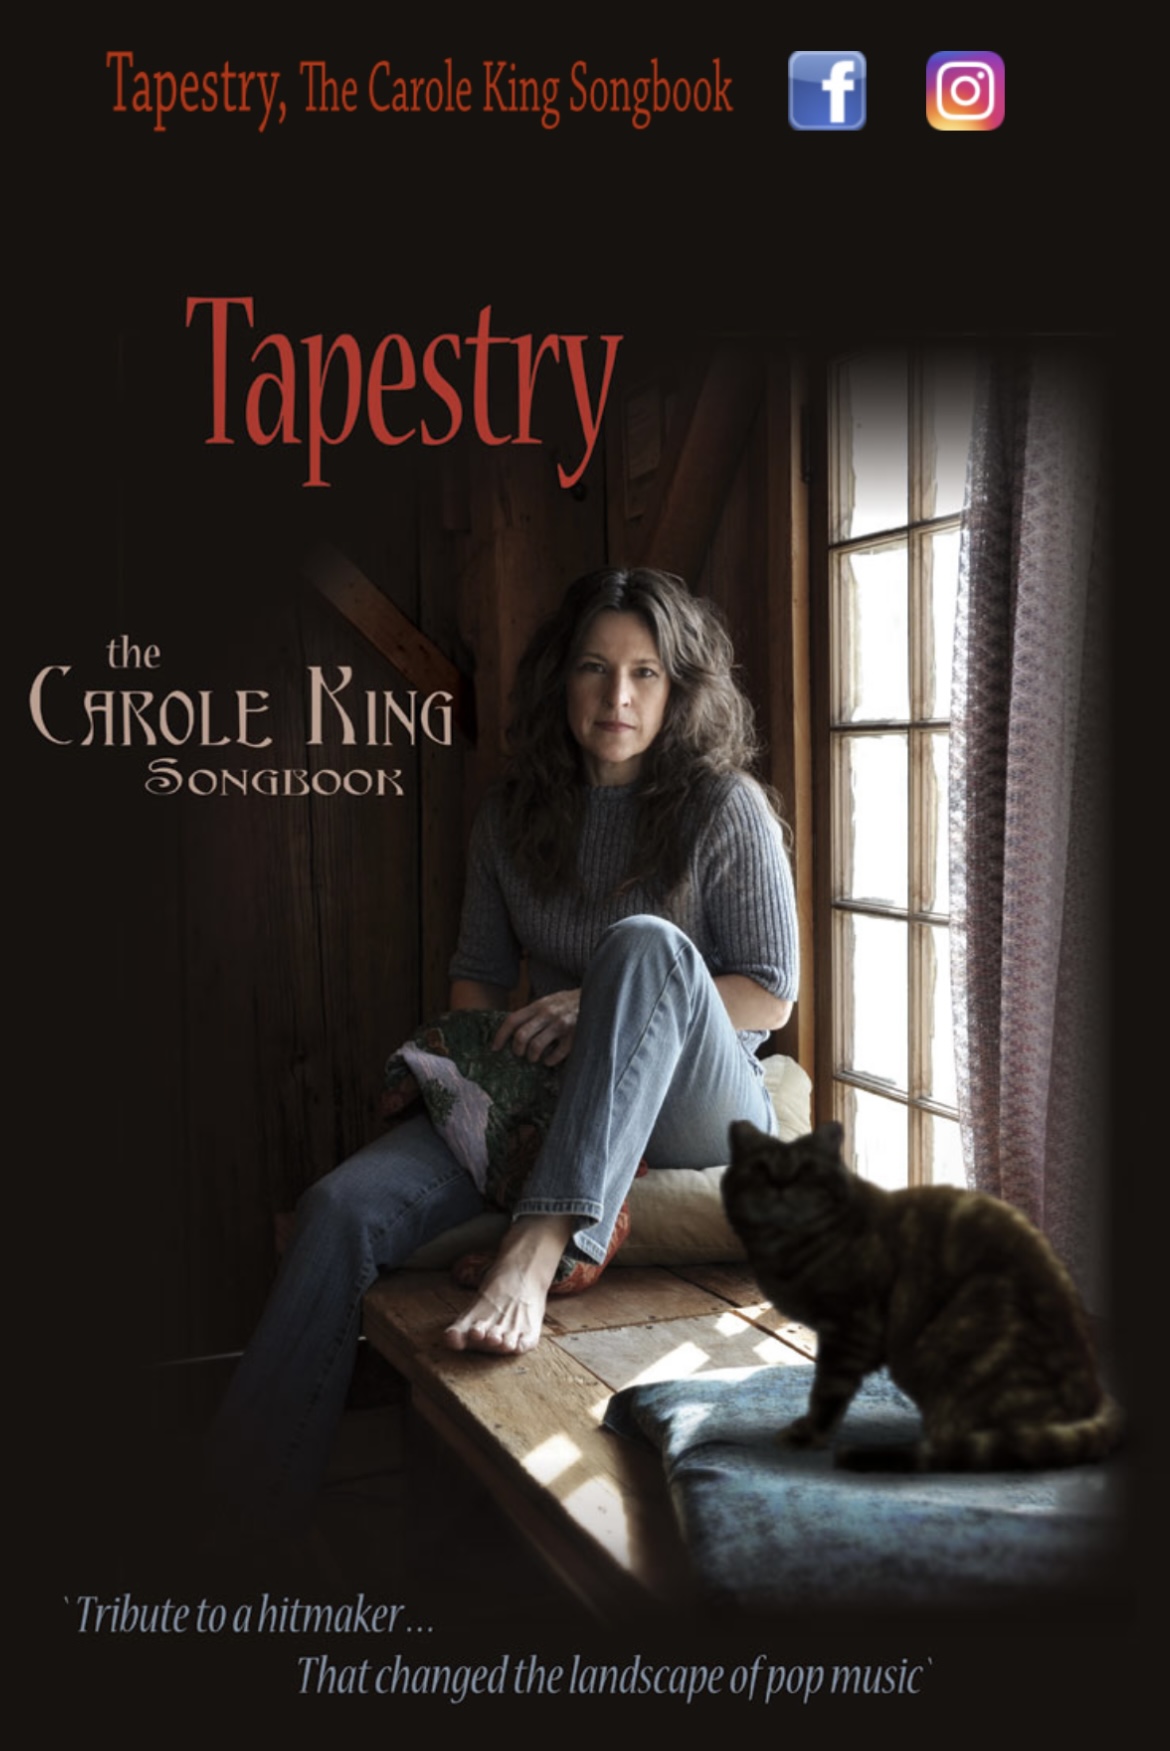 Tapestry the Carole King Songbook